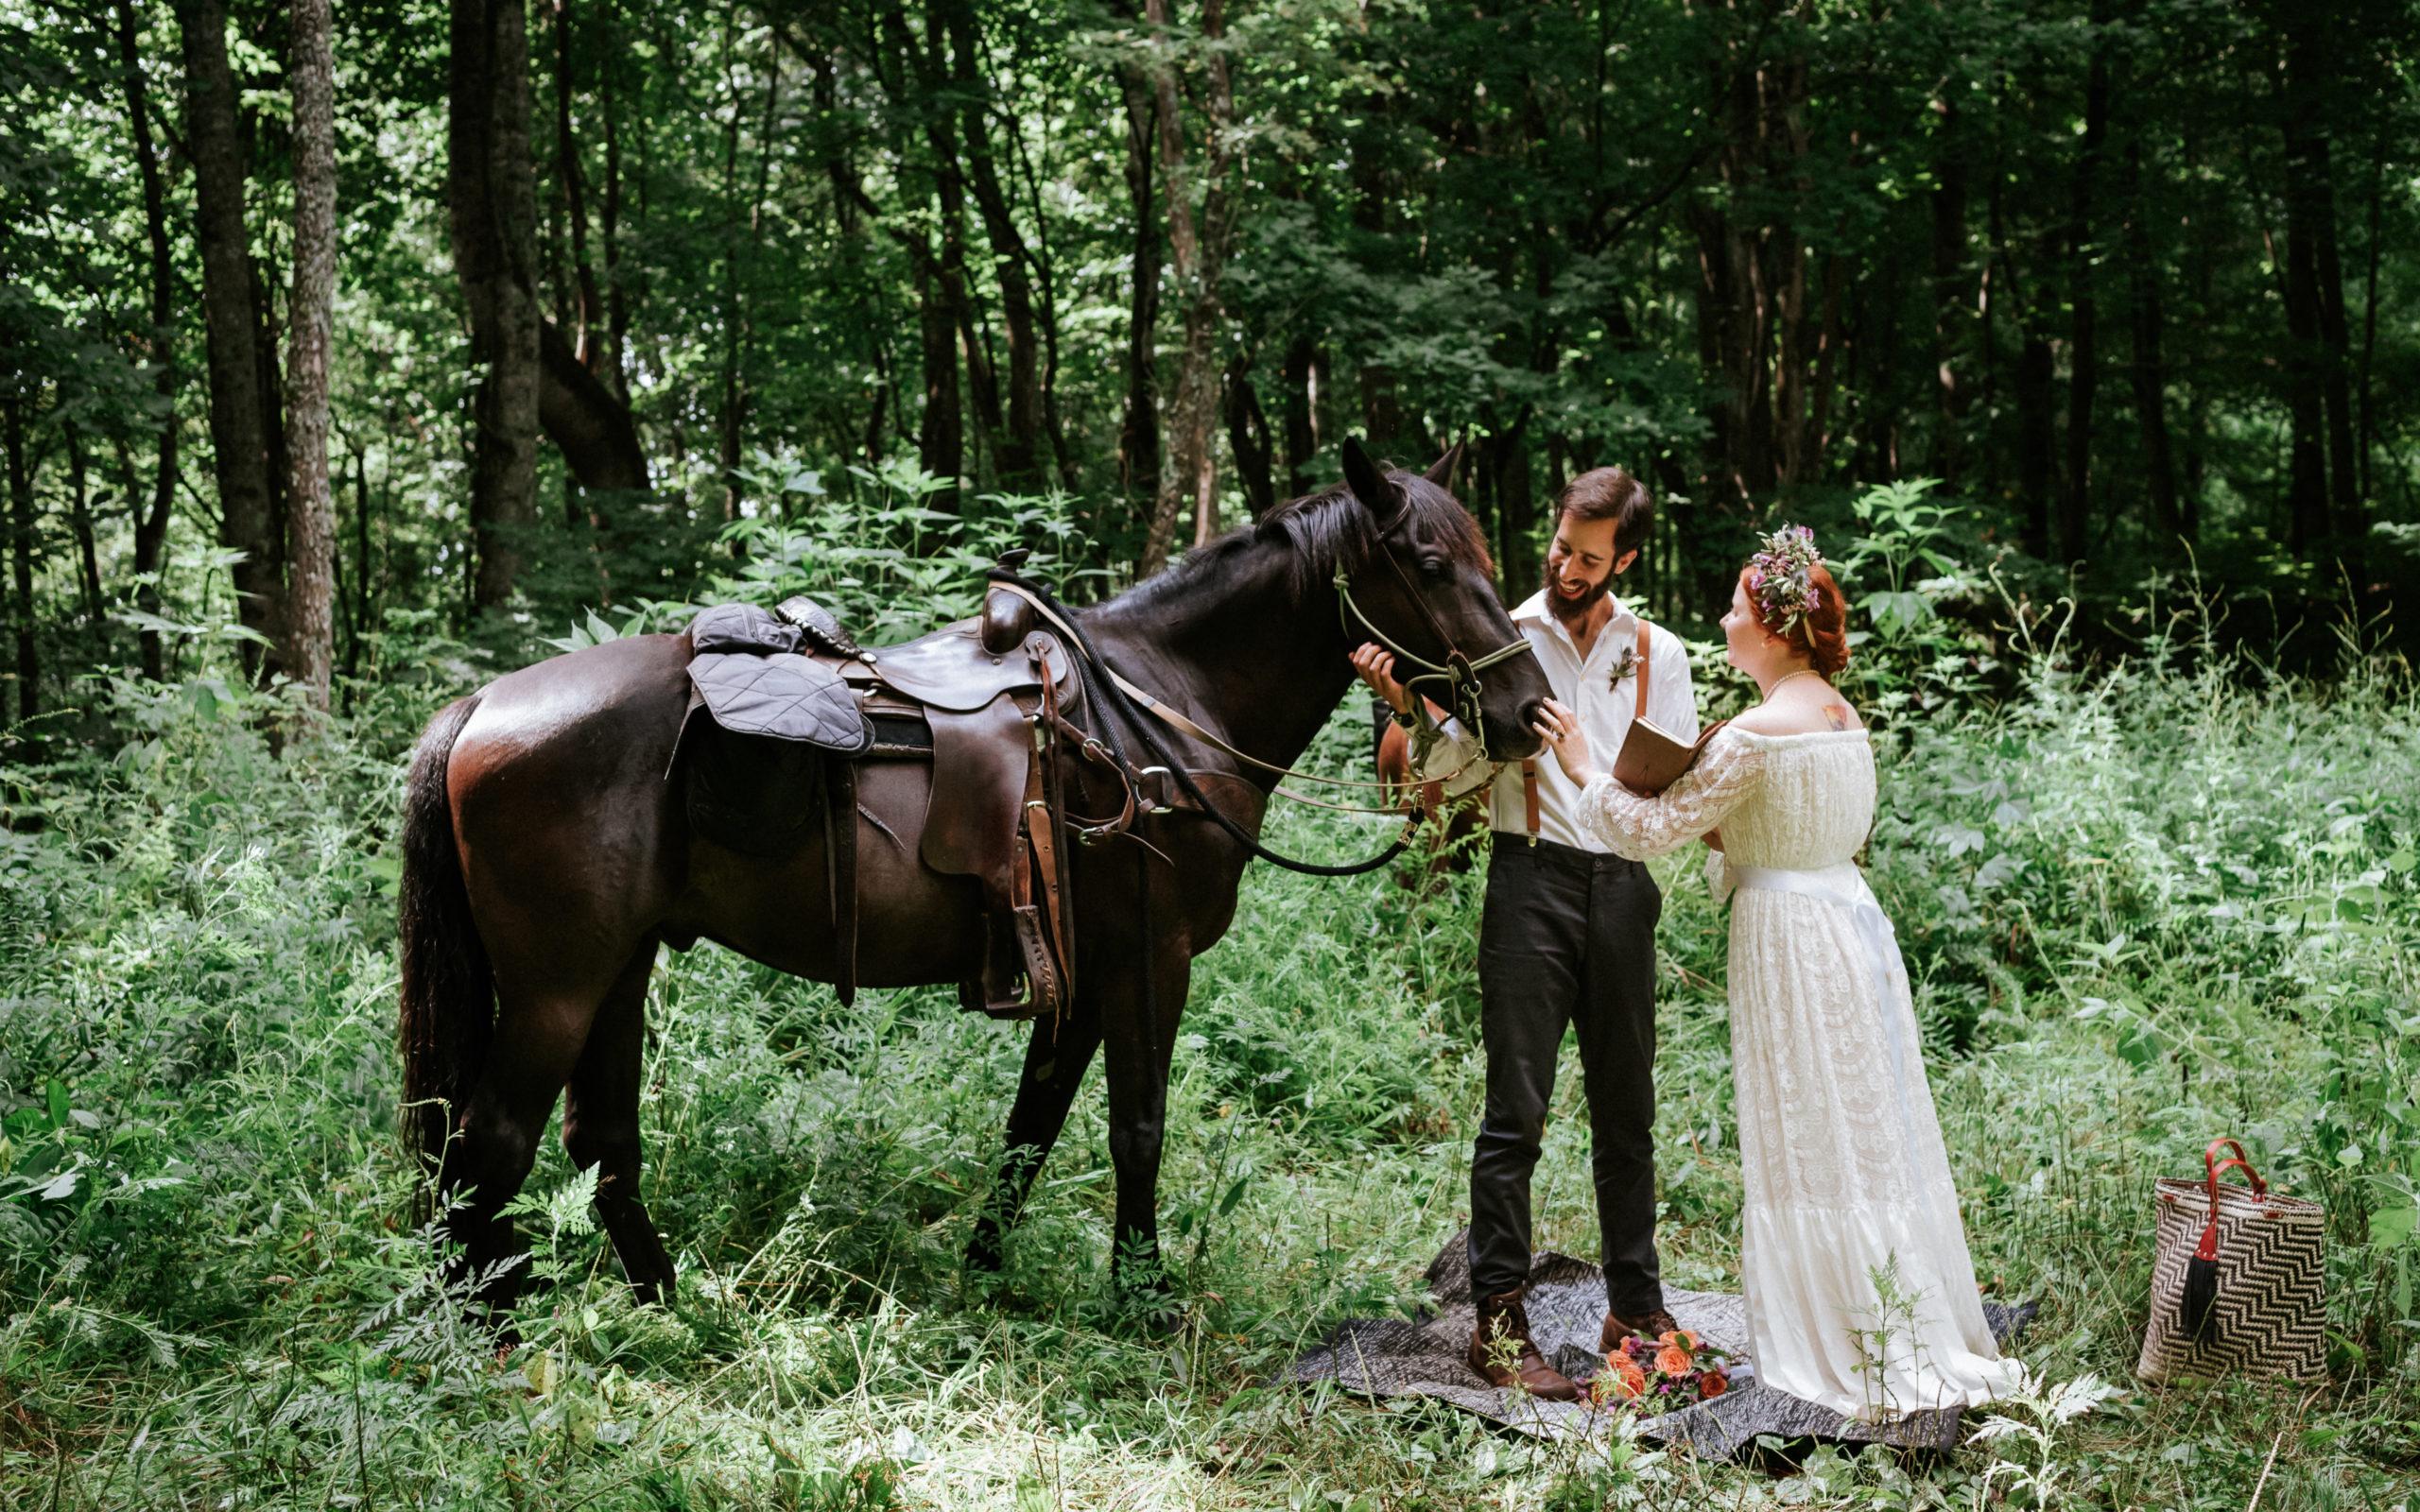 This picture is of a bride and groom petting a horse together. They are in the forest, surrounded by green.